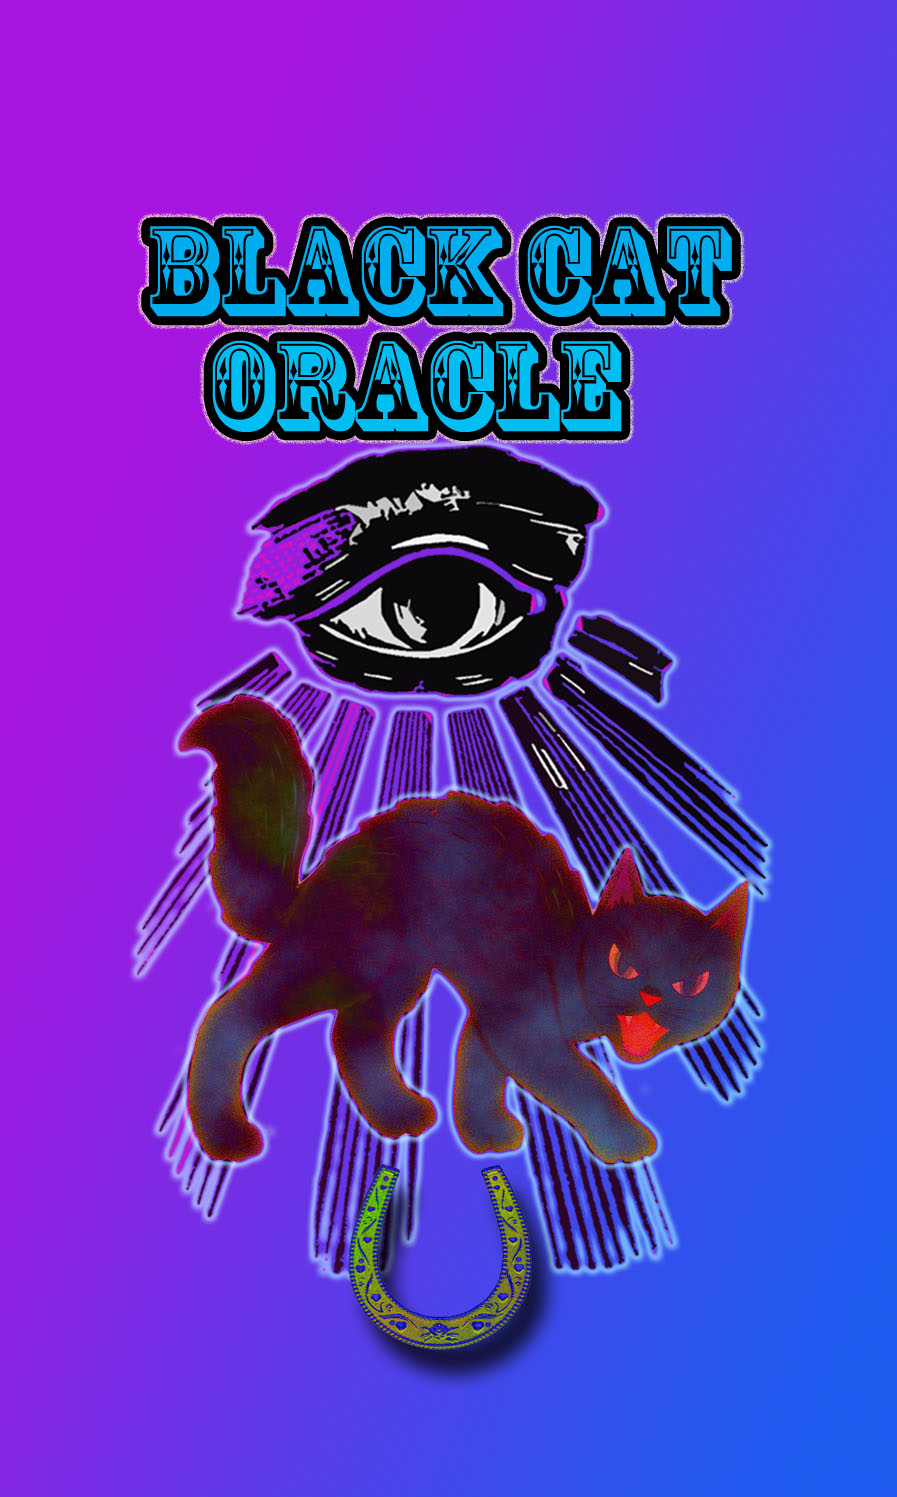 The Black Cat Oracle